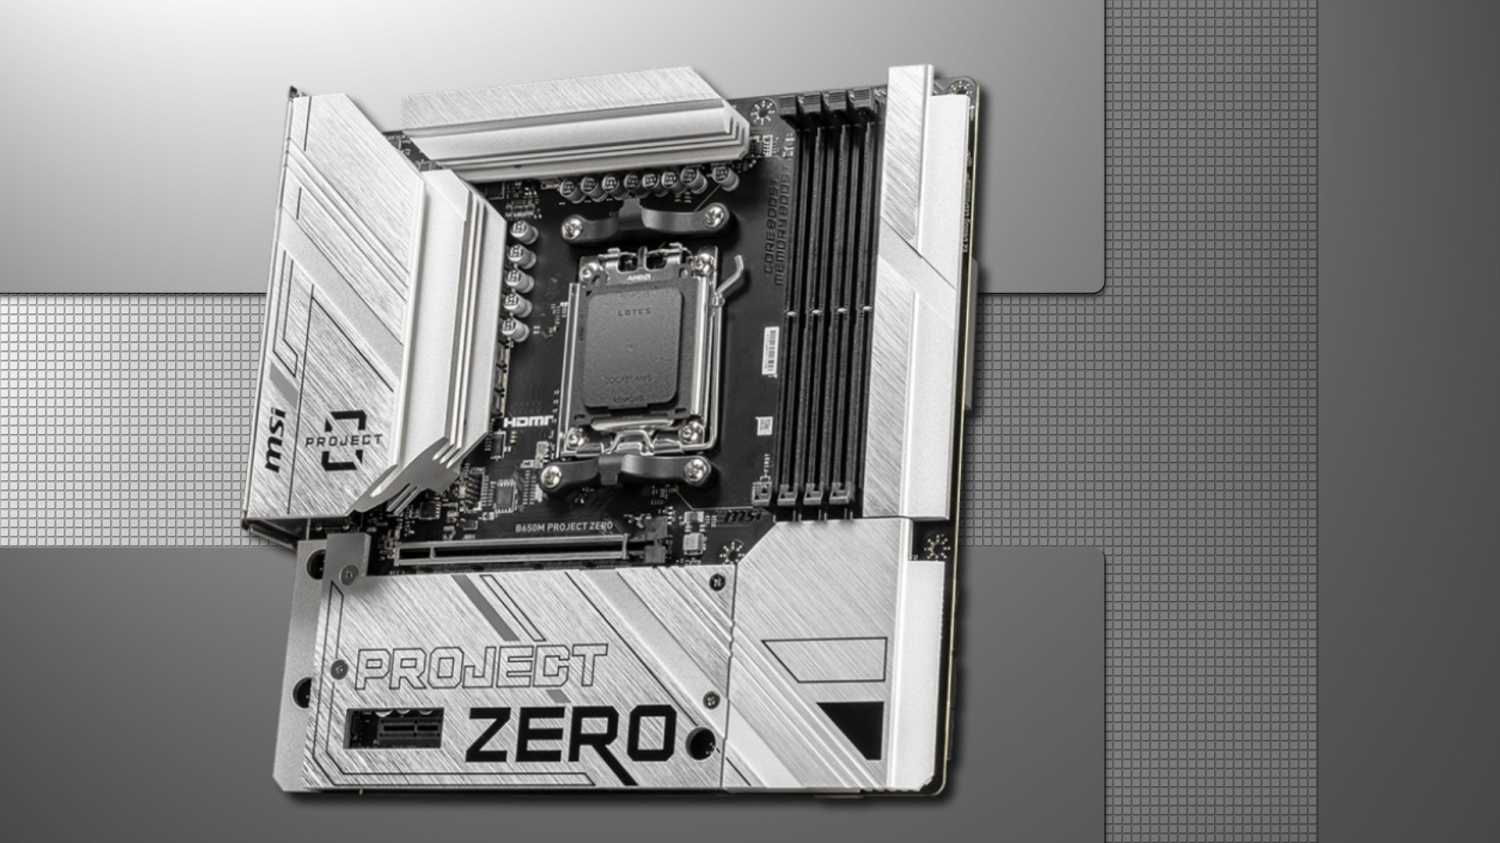 Poor Asuka: Asus Apologizes for Typo on Evangelion Motherboard | PCMag